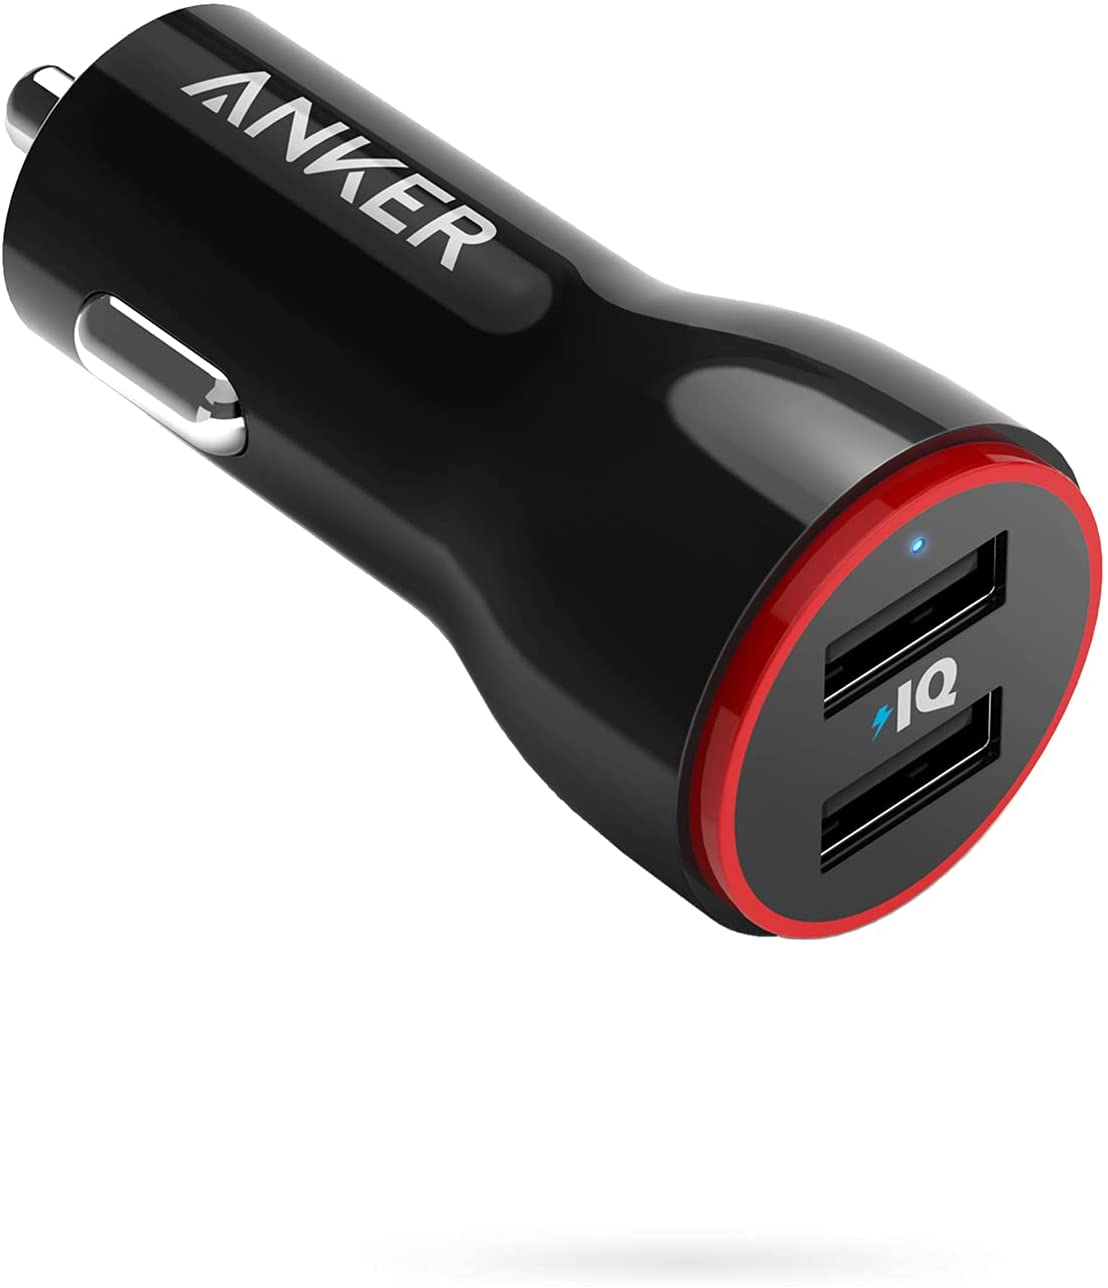 Anker PowerDrive 2 24W 2-Port Car Charger - Black (A2310H11)